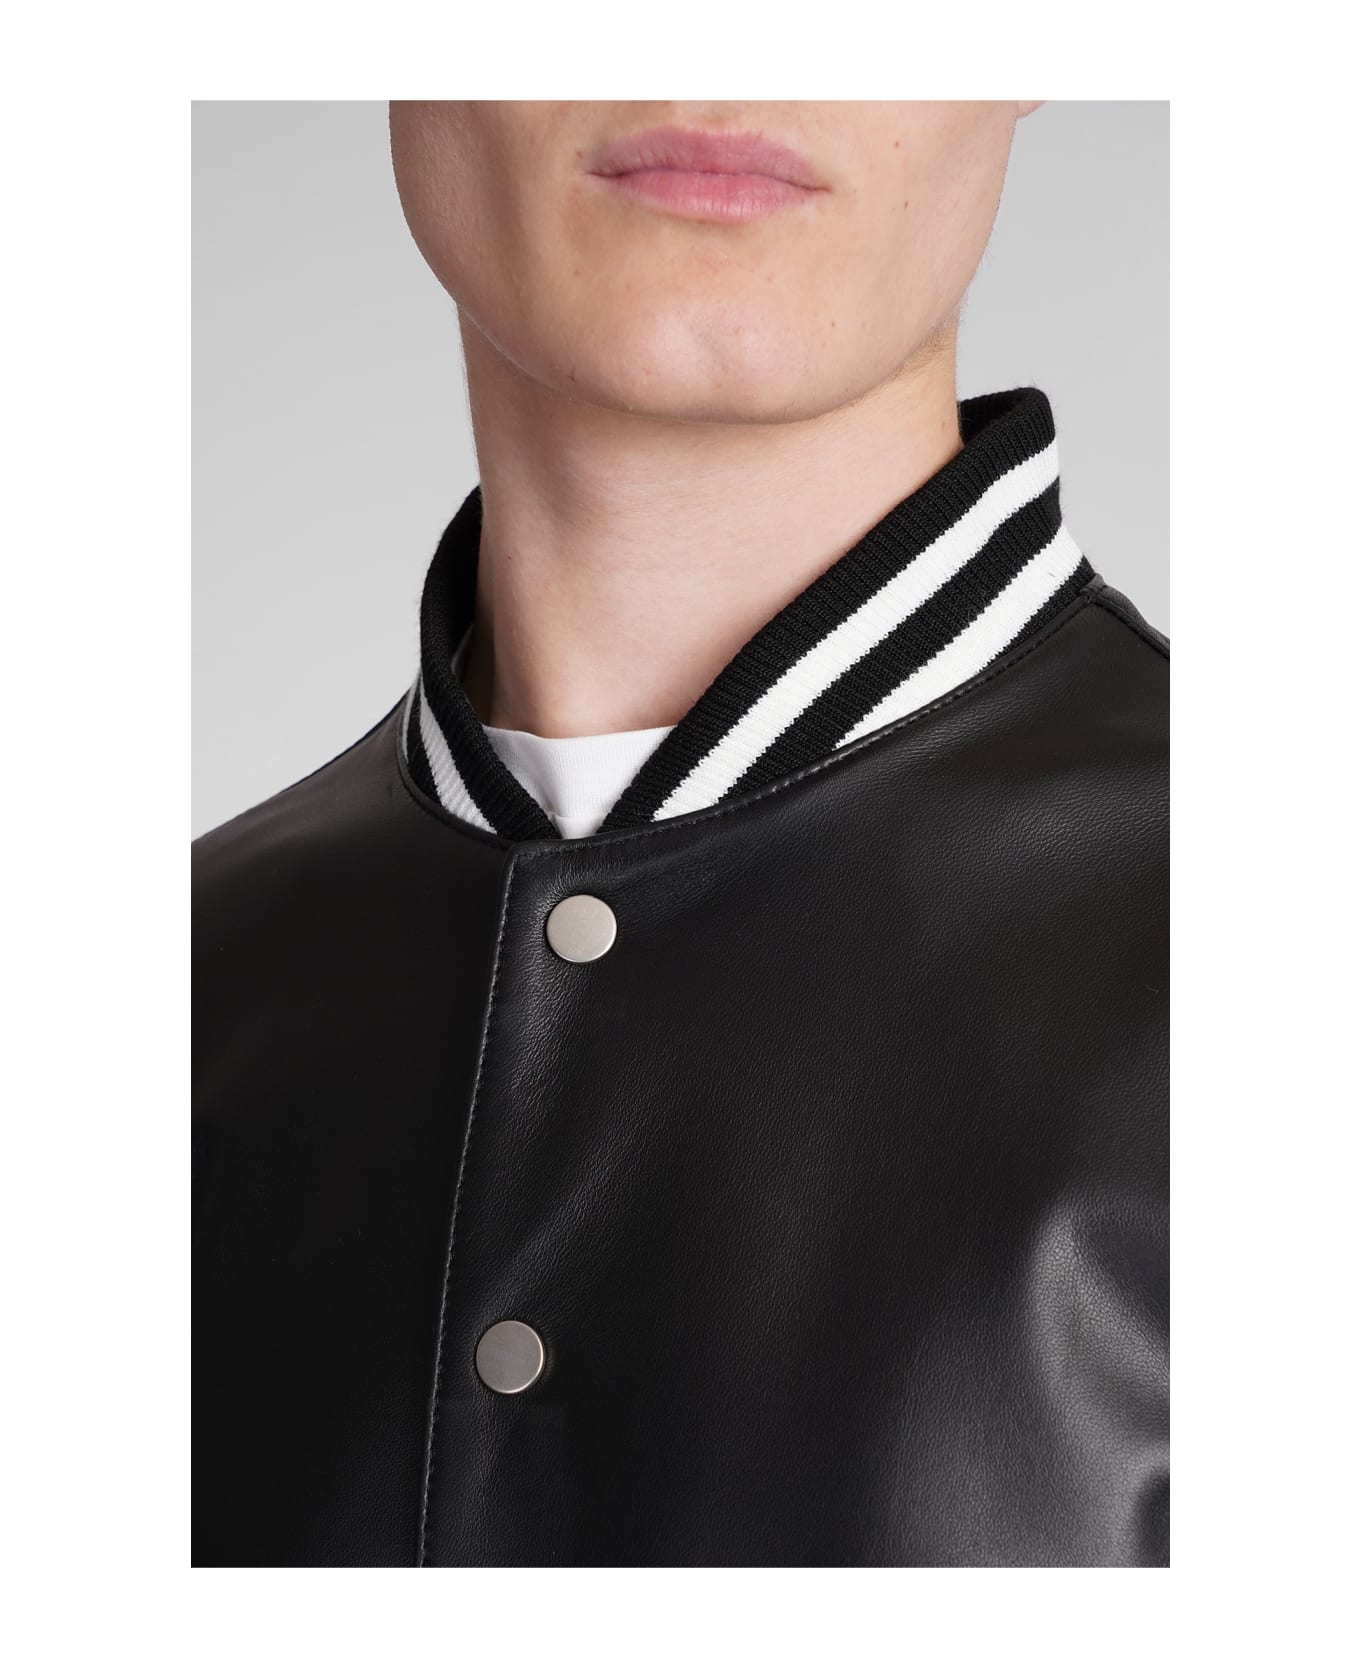 Low Brand Bomber In Black Leather - black